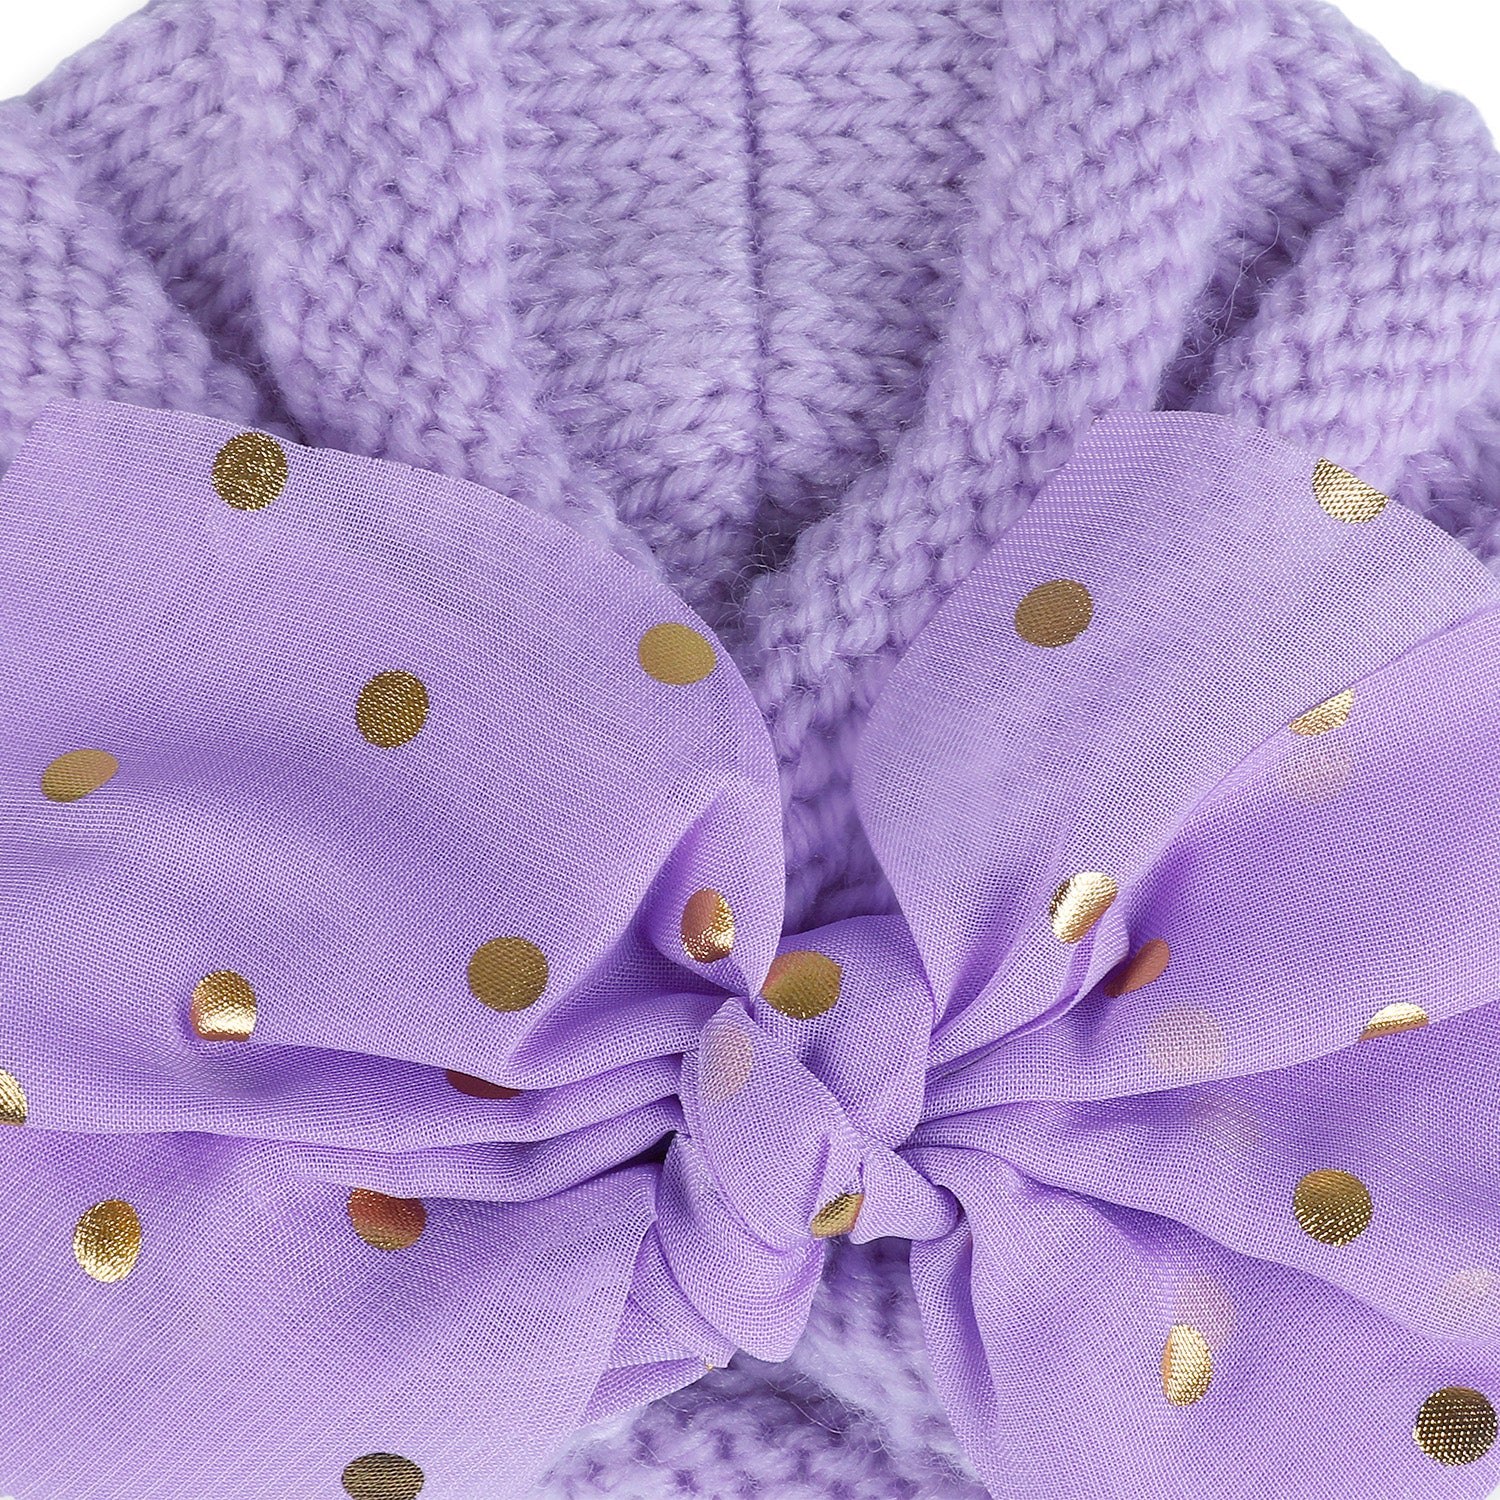 Baby Moo Partywear Sequence Bow 2 Pack Turban Caps - Lilac And White - Baby Moo